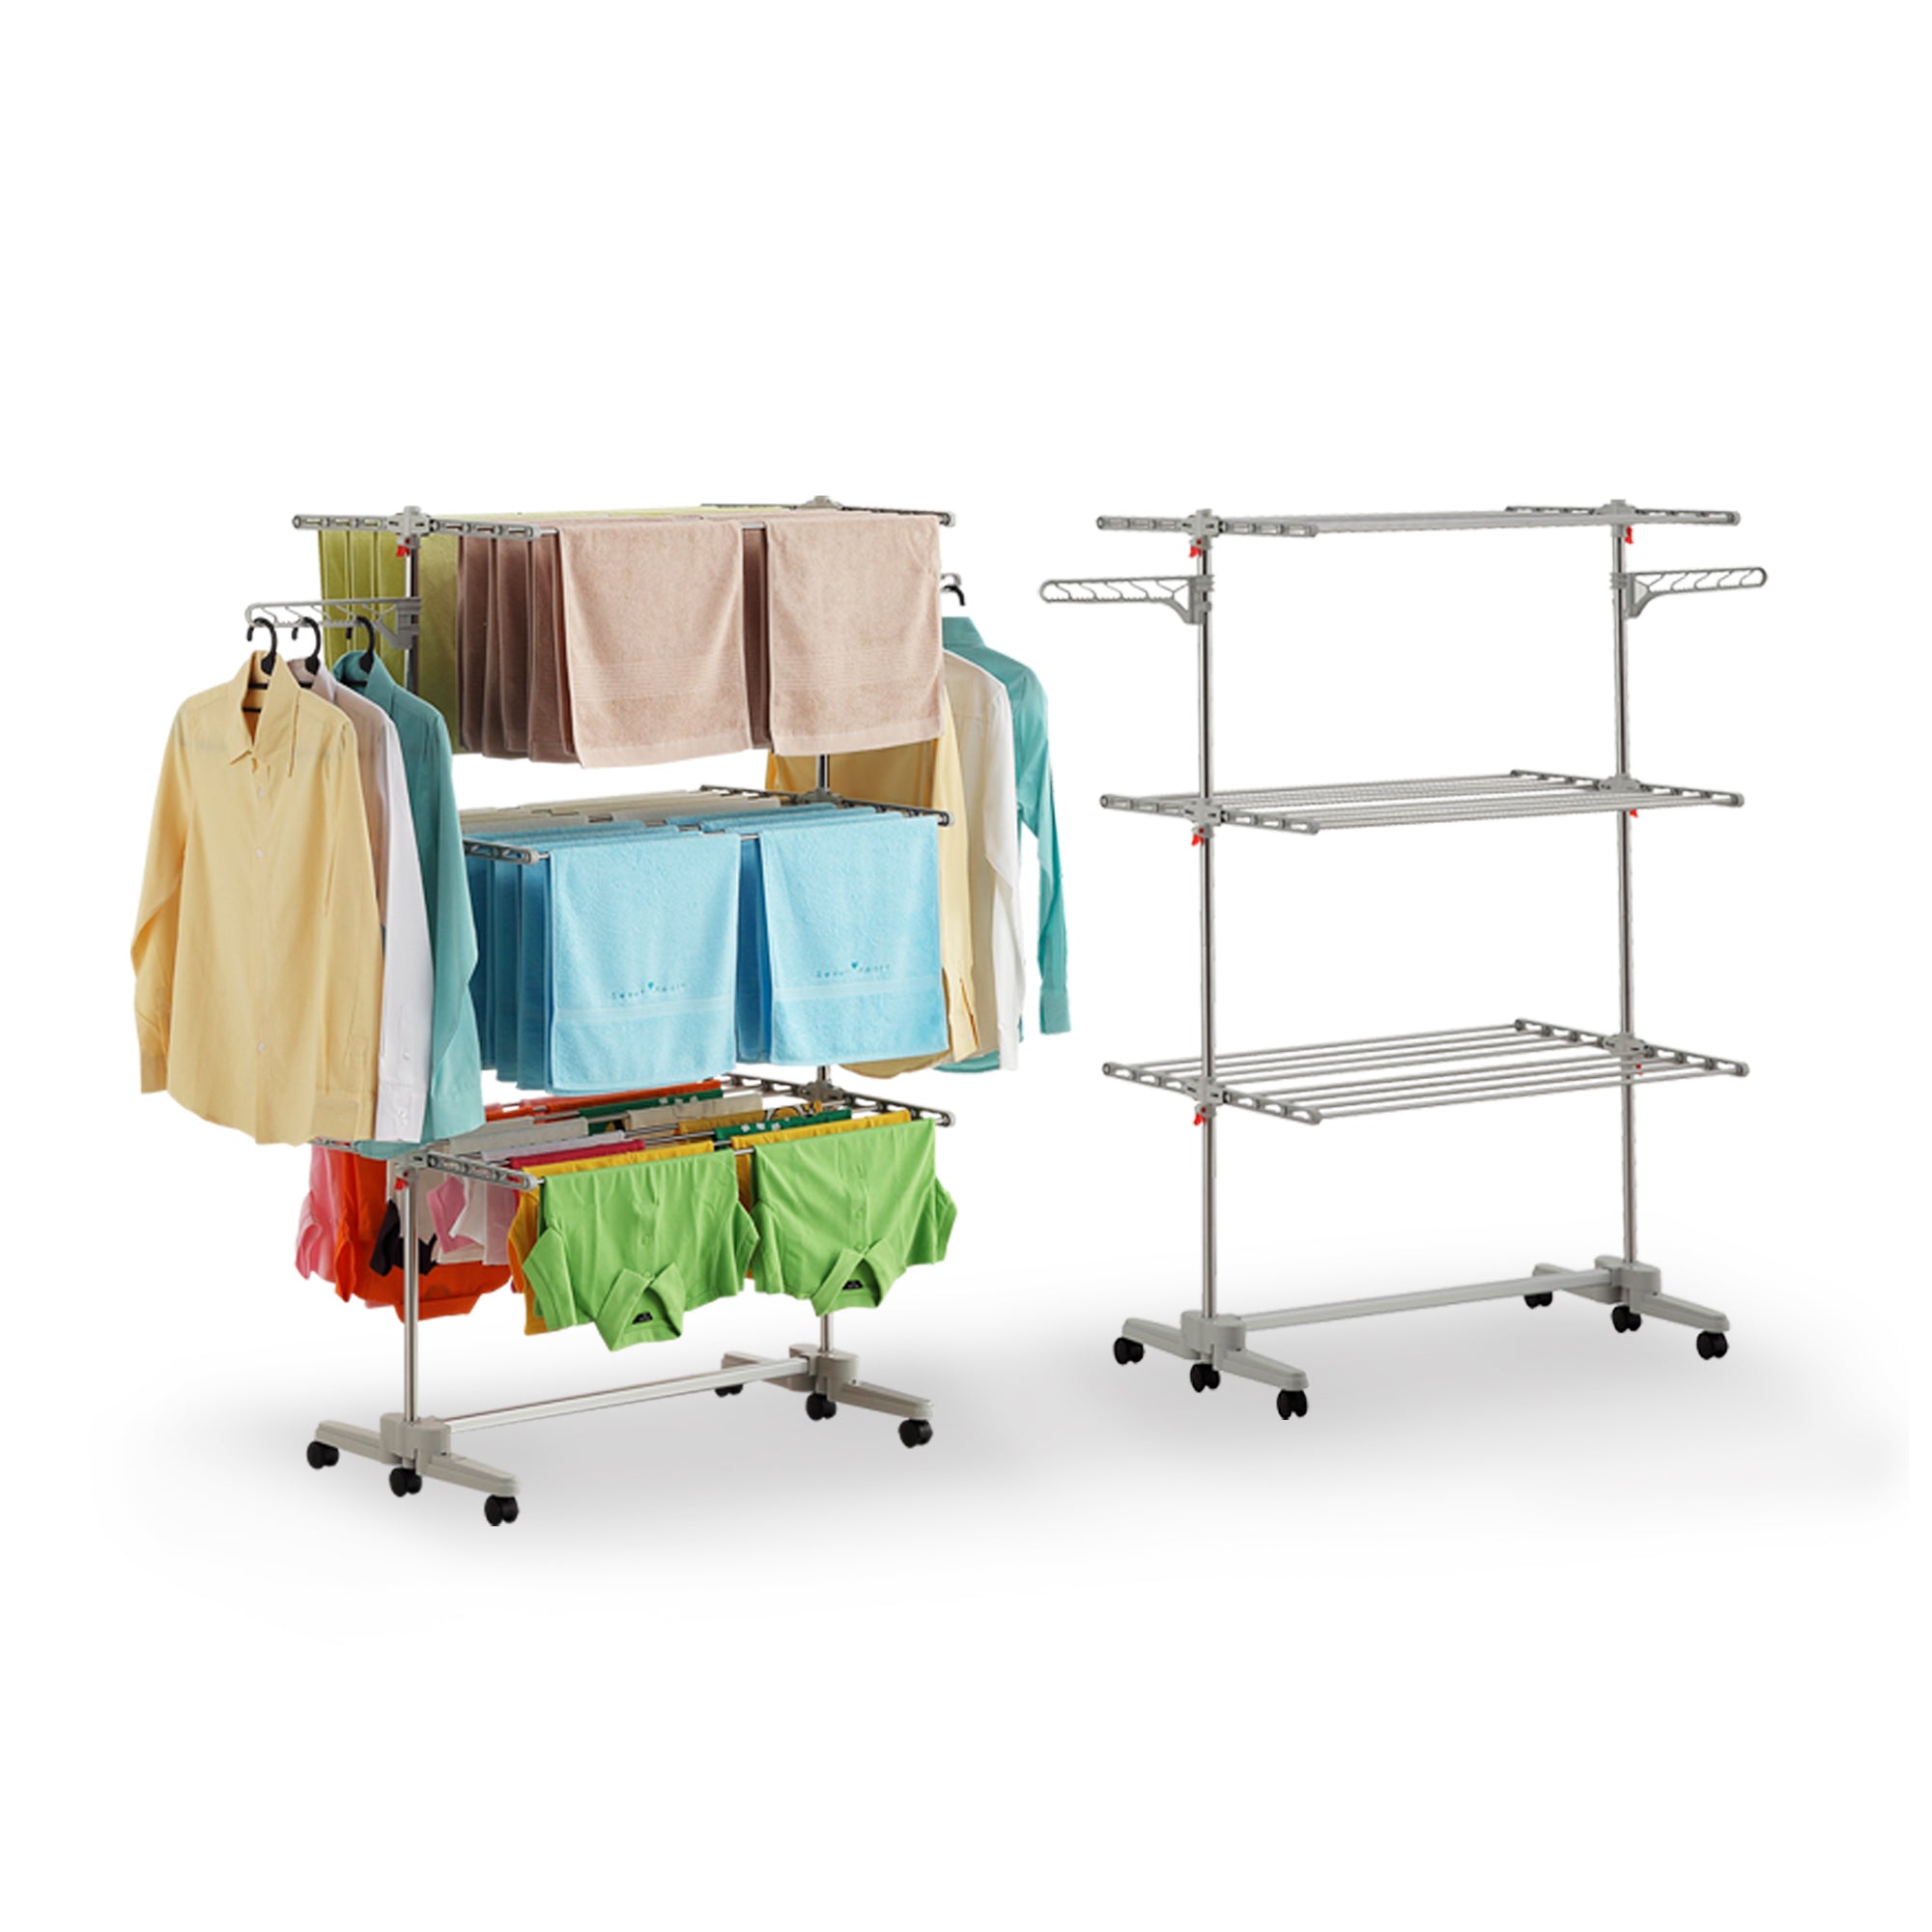 Buy Multilayer Cloth Drying Stand Online